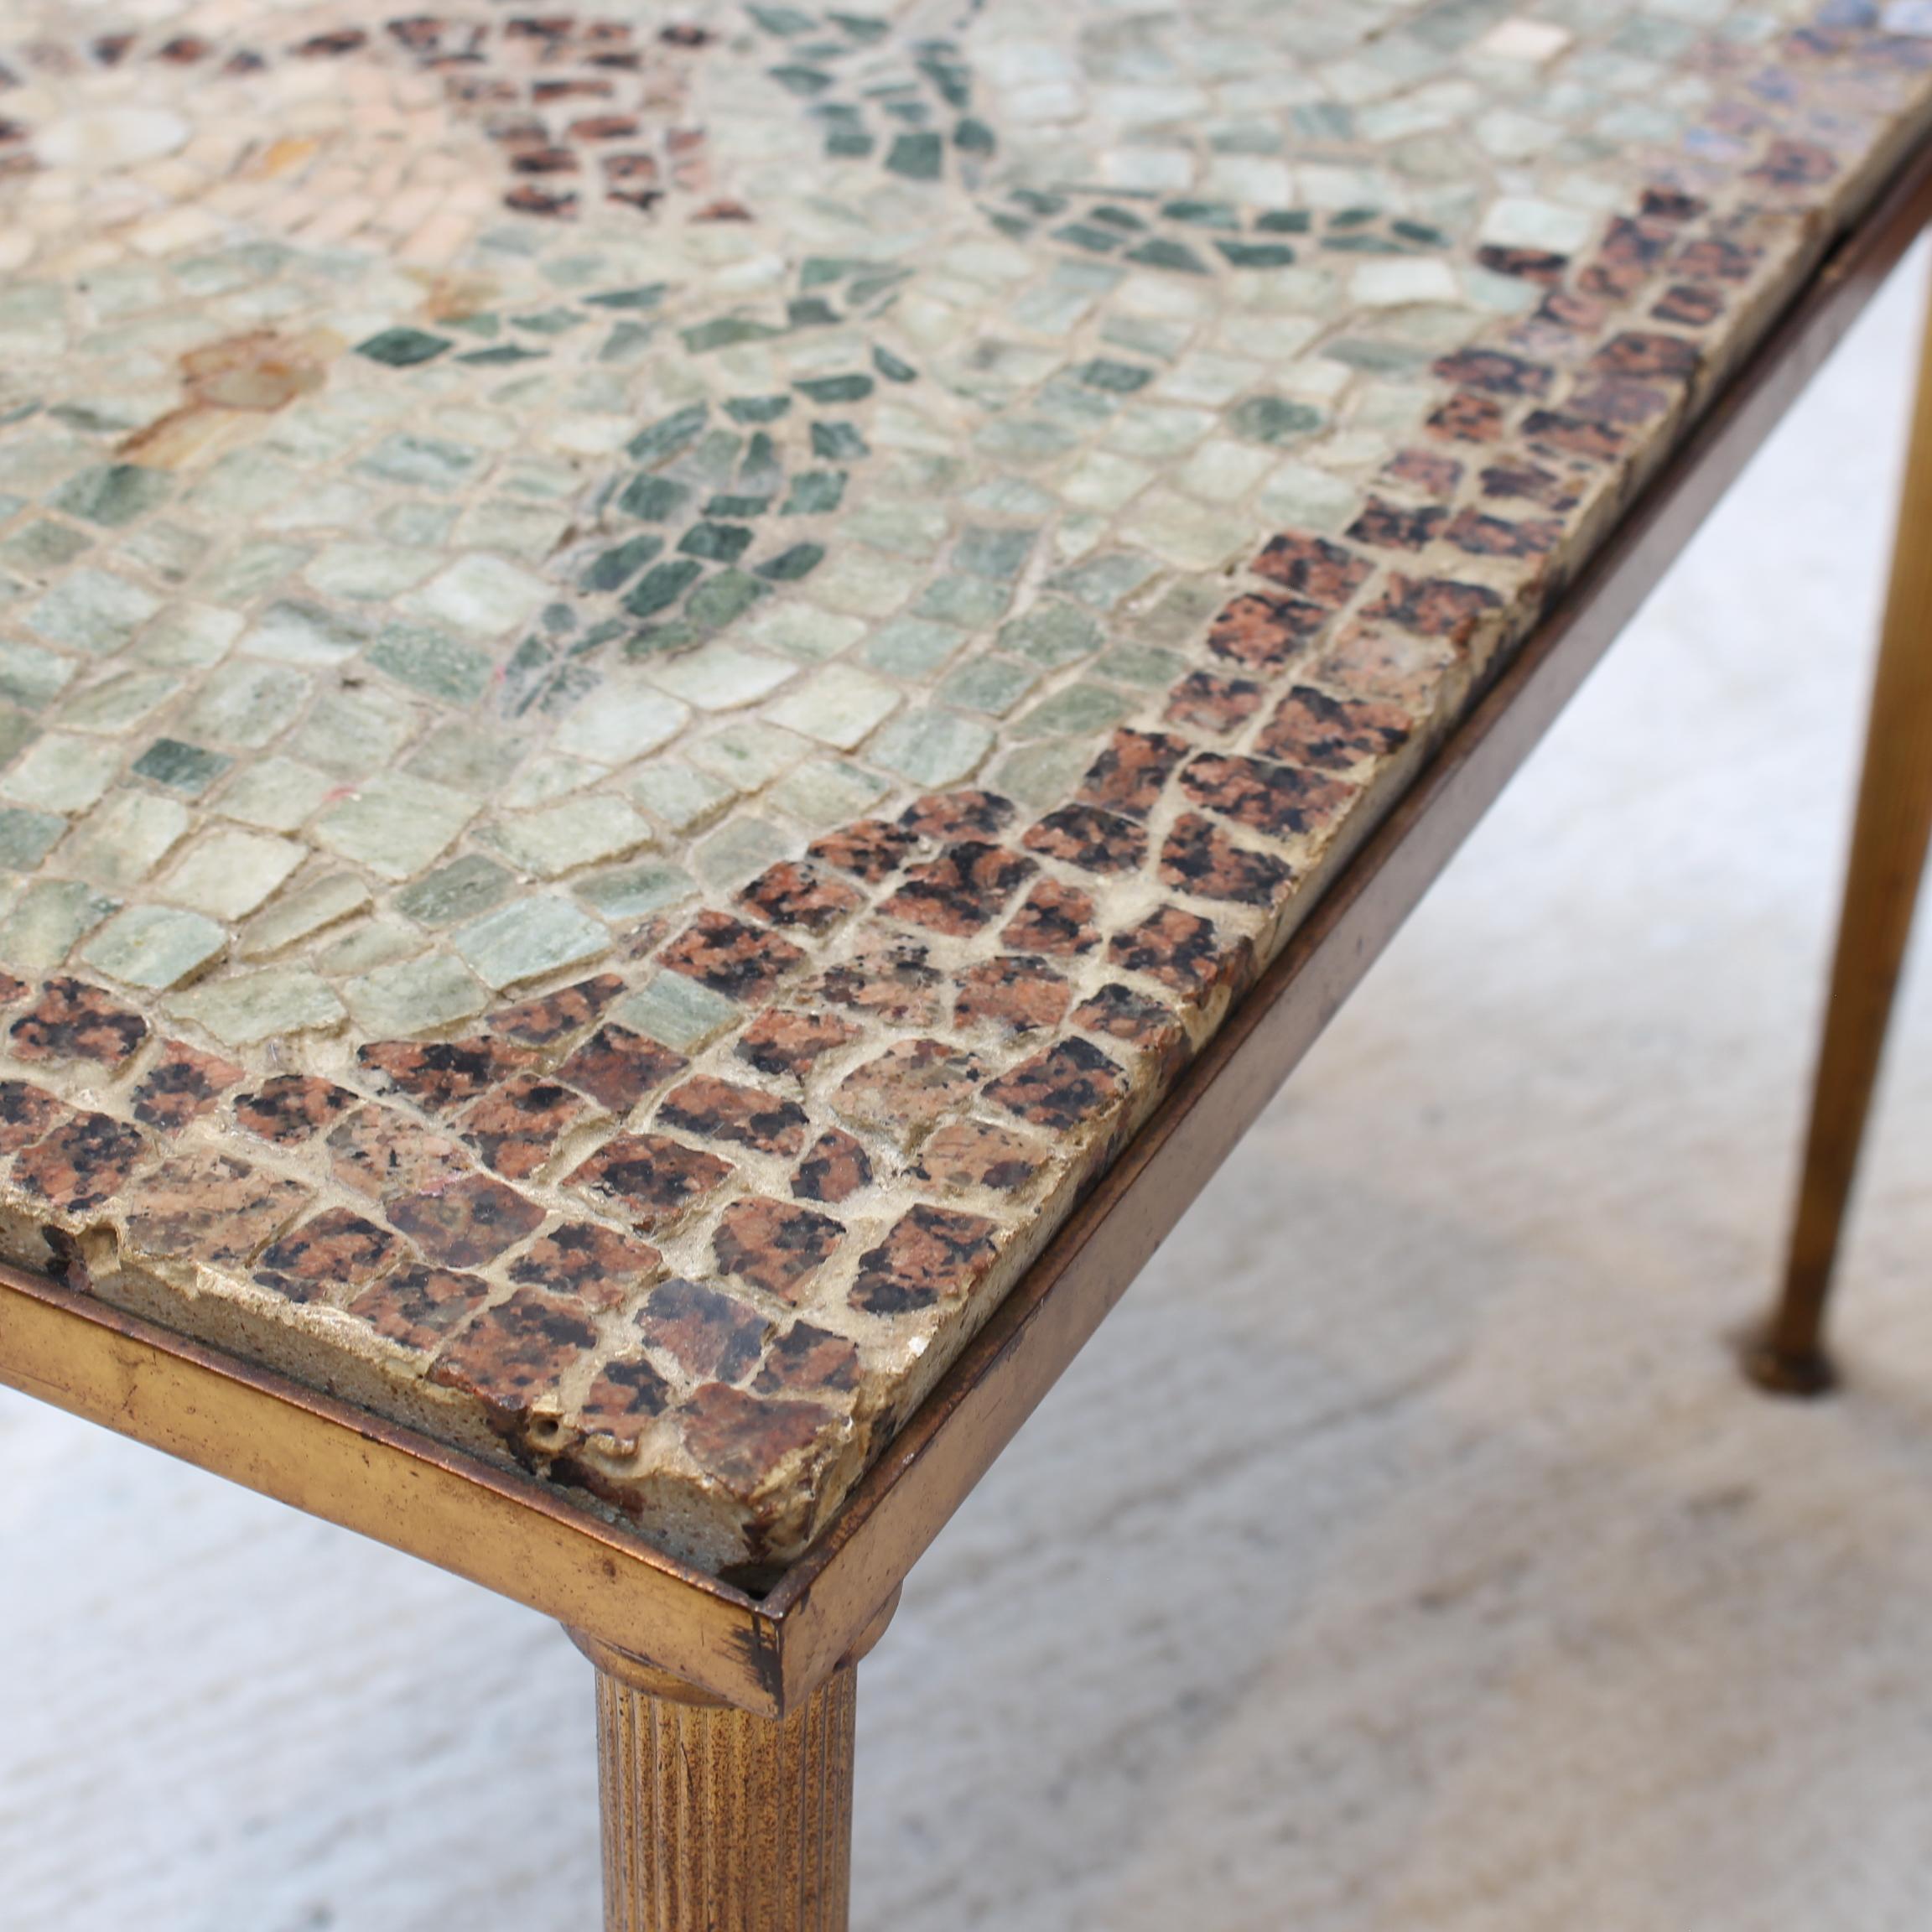 Vintage Low Table with Italian Style Mosaic Top, 'circa 1950s' For Sale 13